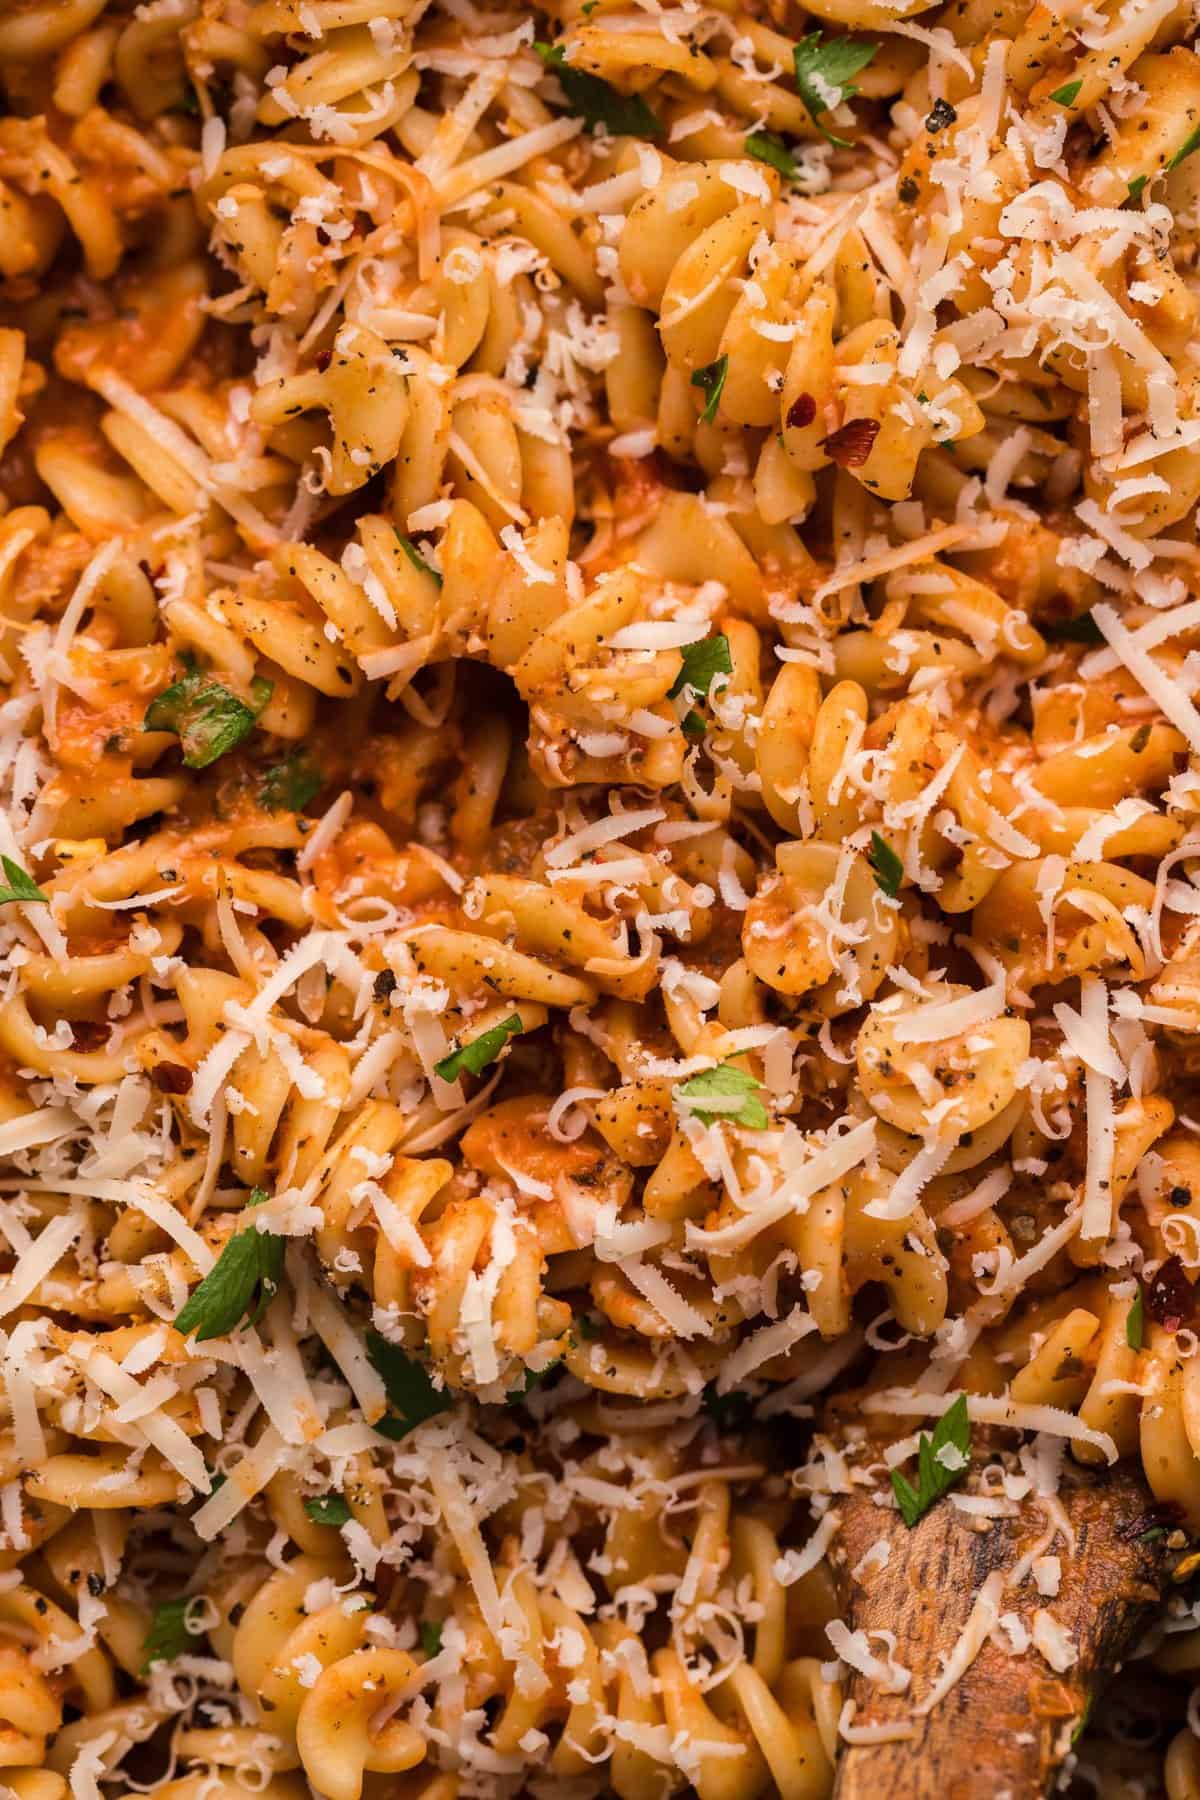 Up close photo of the spicy fusilli pasta garnished with shredded parmesan cheese.